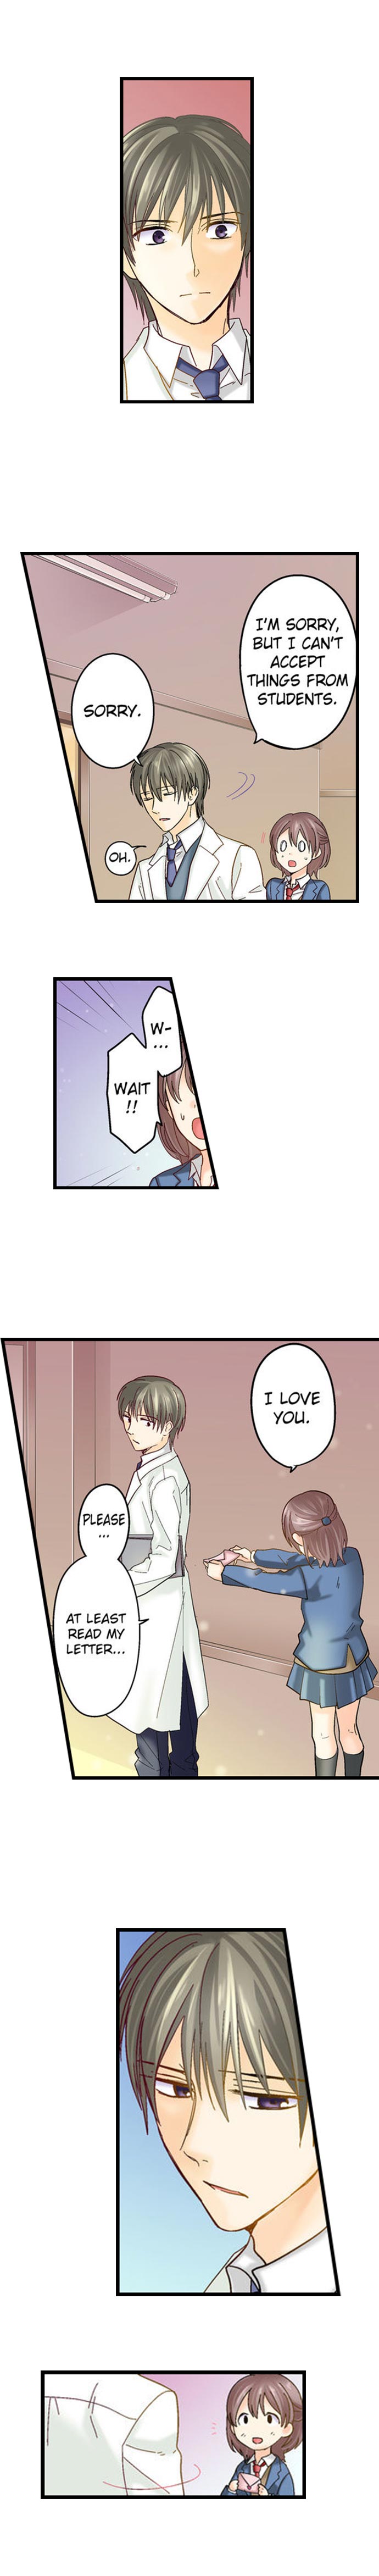 Running a Love Hotel with My Math Teacher - Chapter 30 Page 5